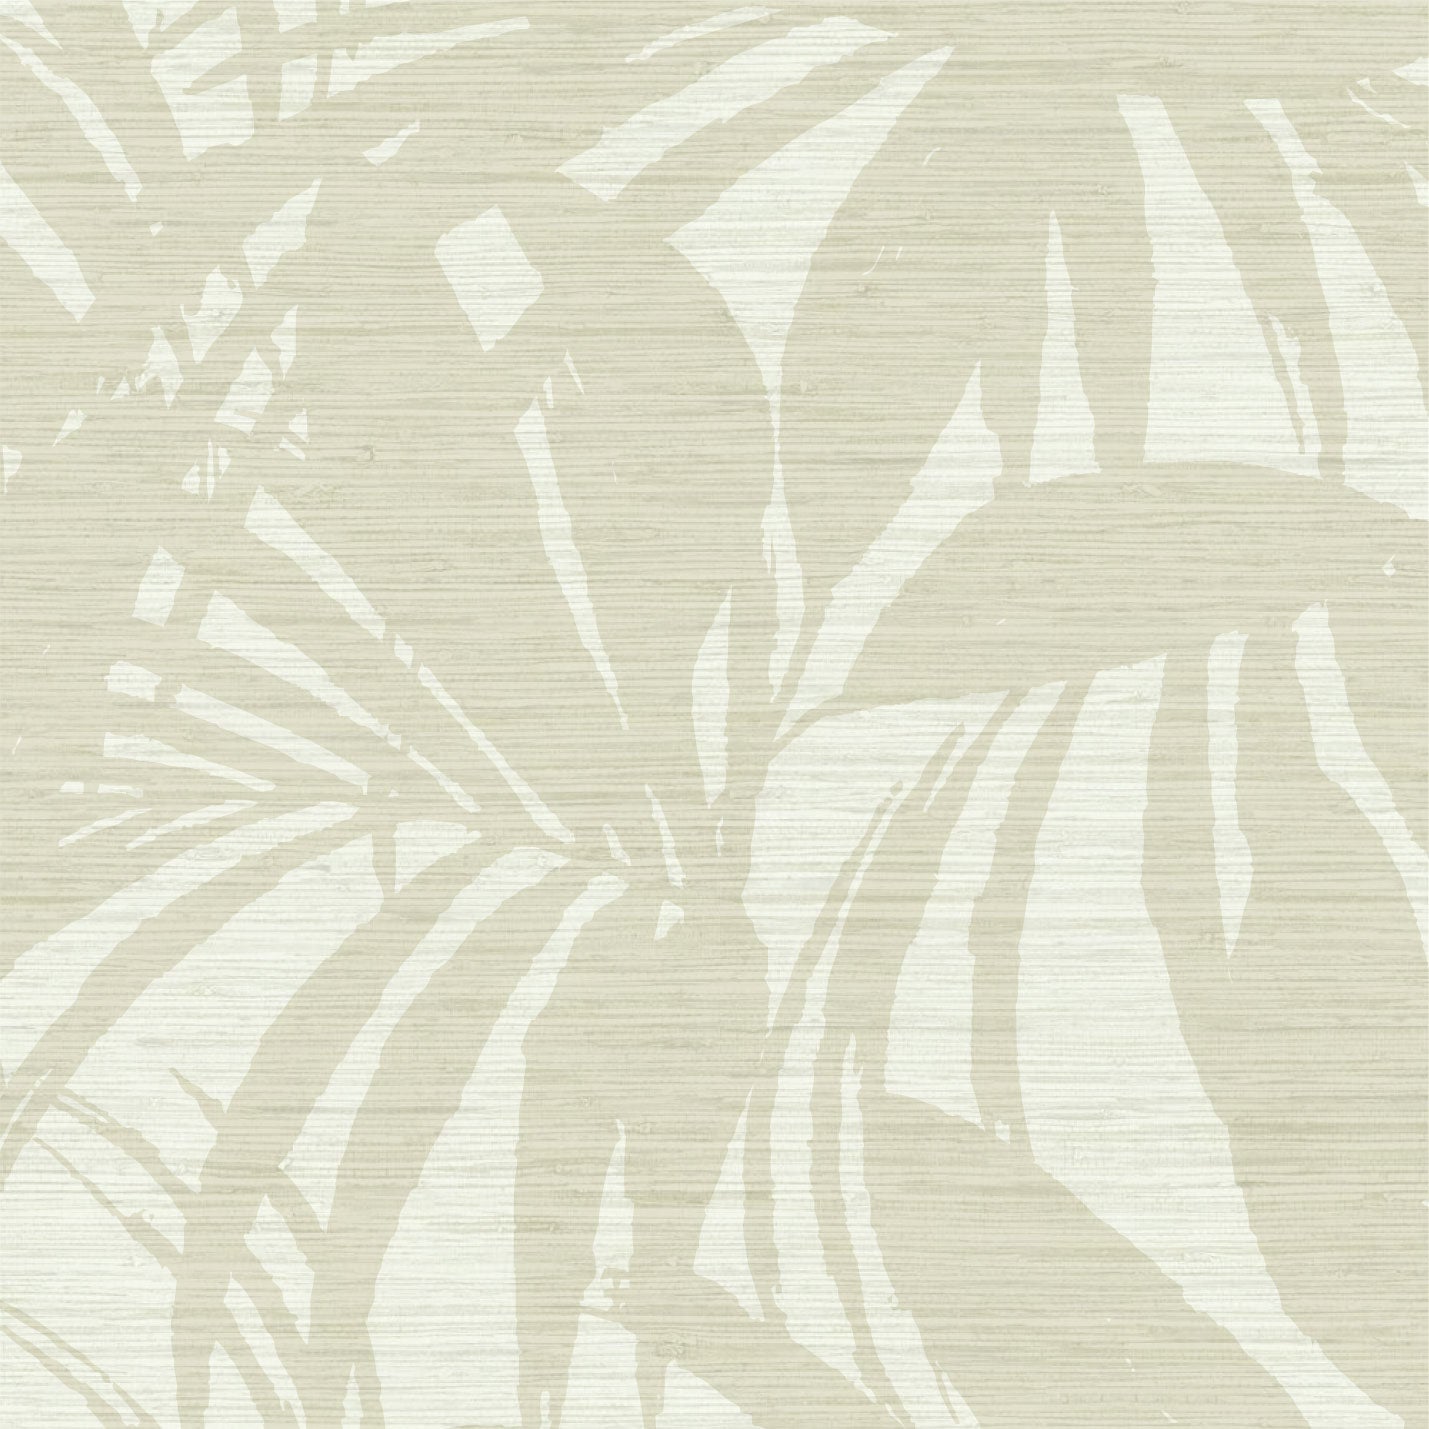 printed grasscloth wallpaper oversize tropical leaf Natural Textured Eco-Friendly Non-toxic High-quality  Sustainable practices Sustainability Interior Design Wall covering Bold retro chic custom jungle garden botanical Seaside Coastal Seashore Waterfront Vacation home styling Retreat Relaxed beach vibes Beach cottage Shoreline Oceanfront white cream sand neutral off-white tan sand